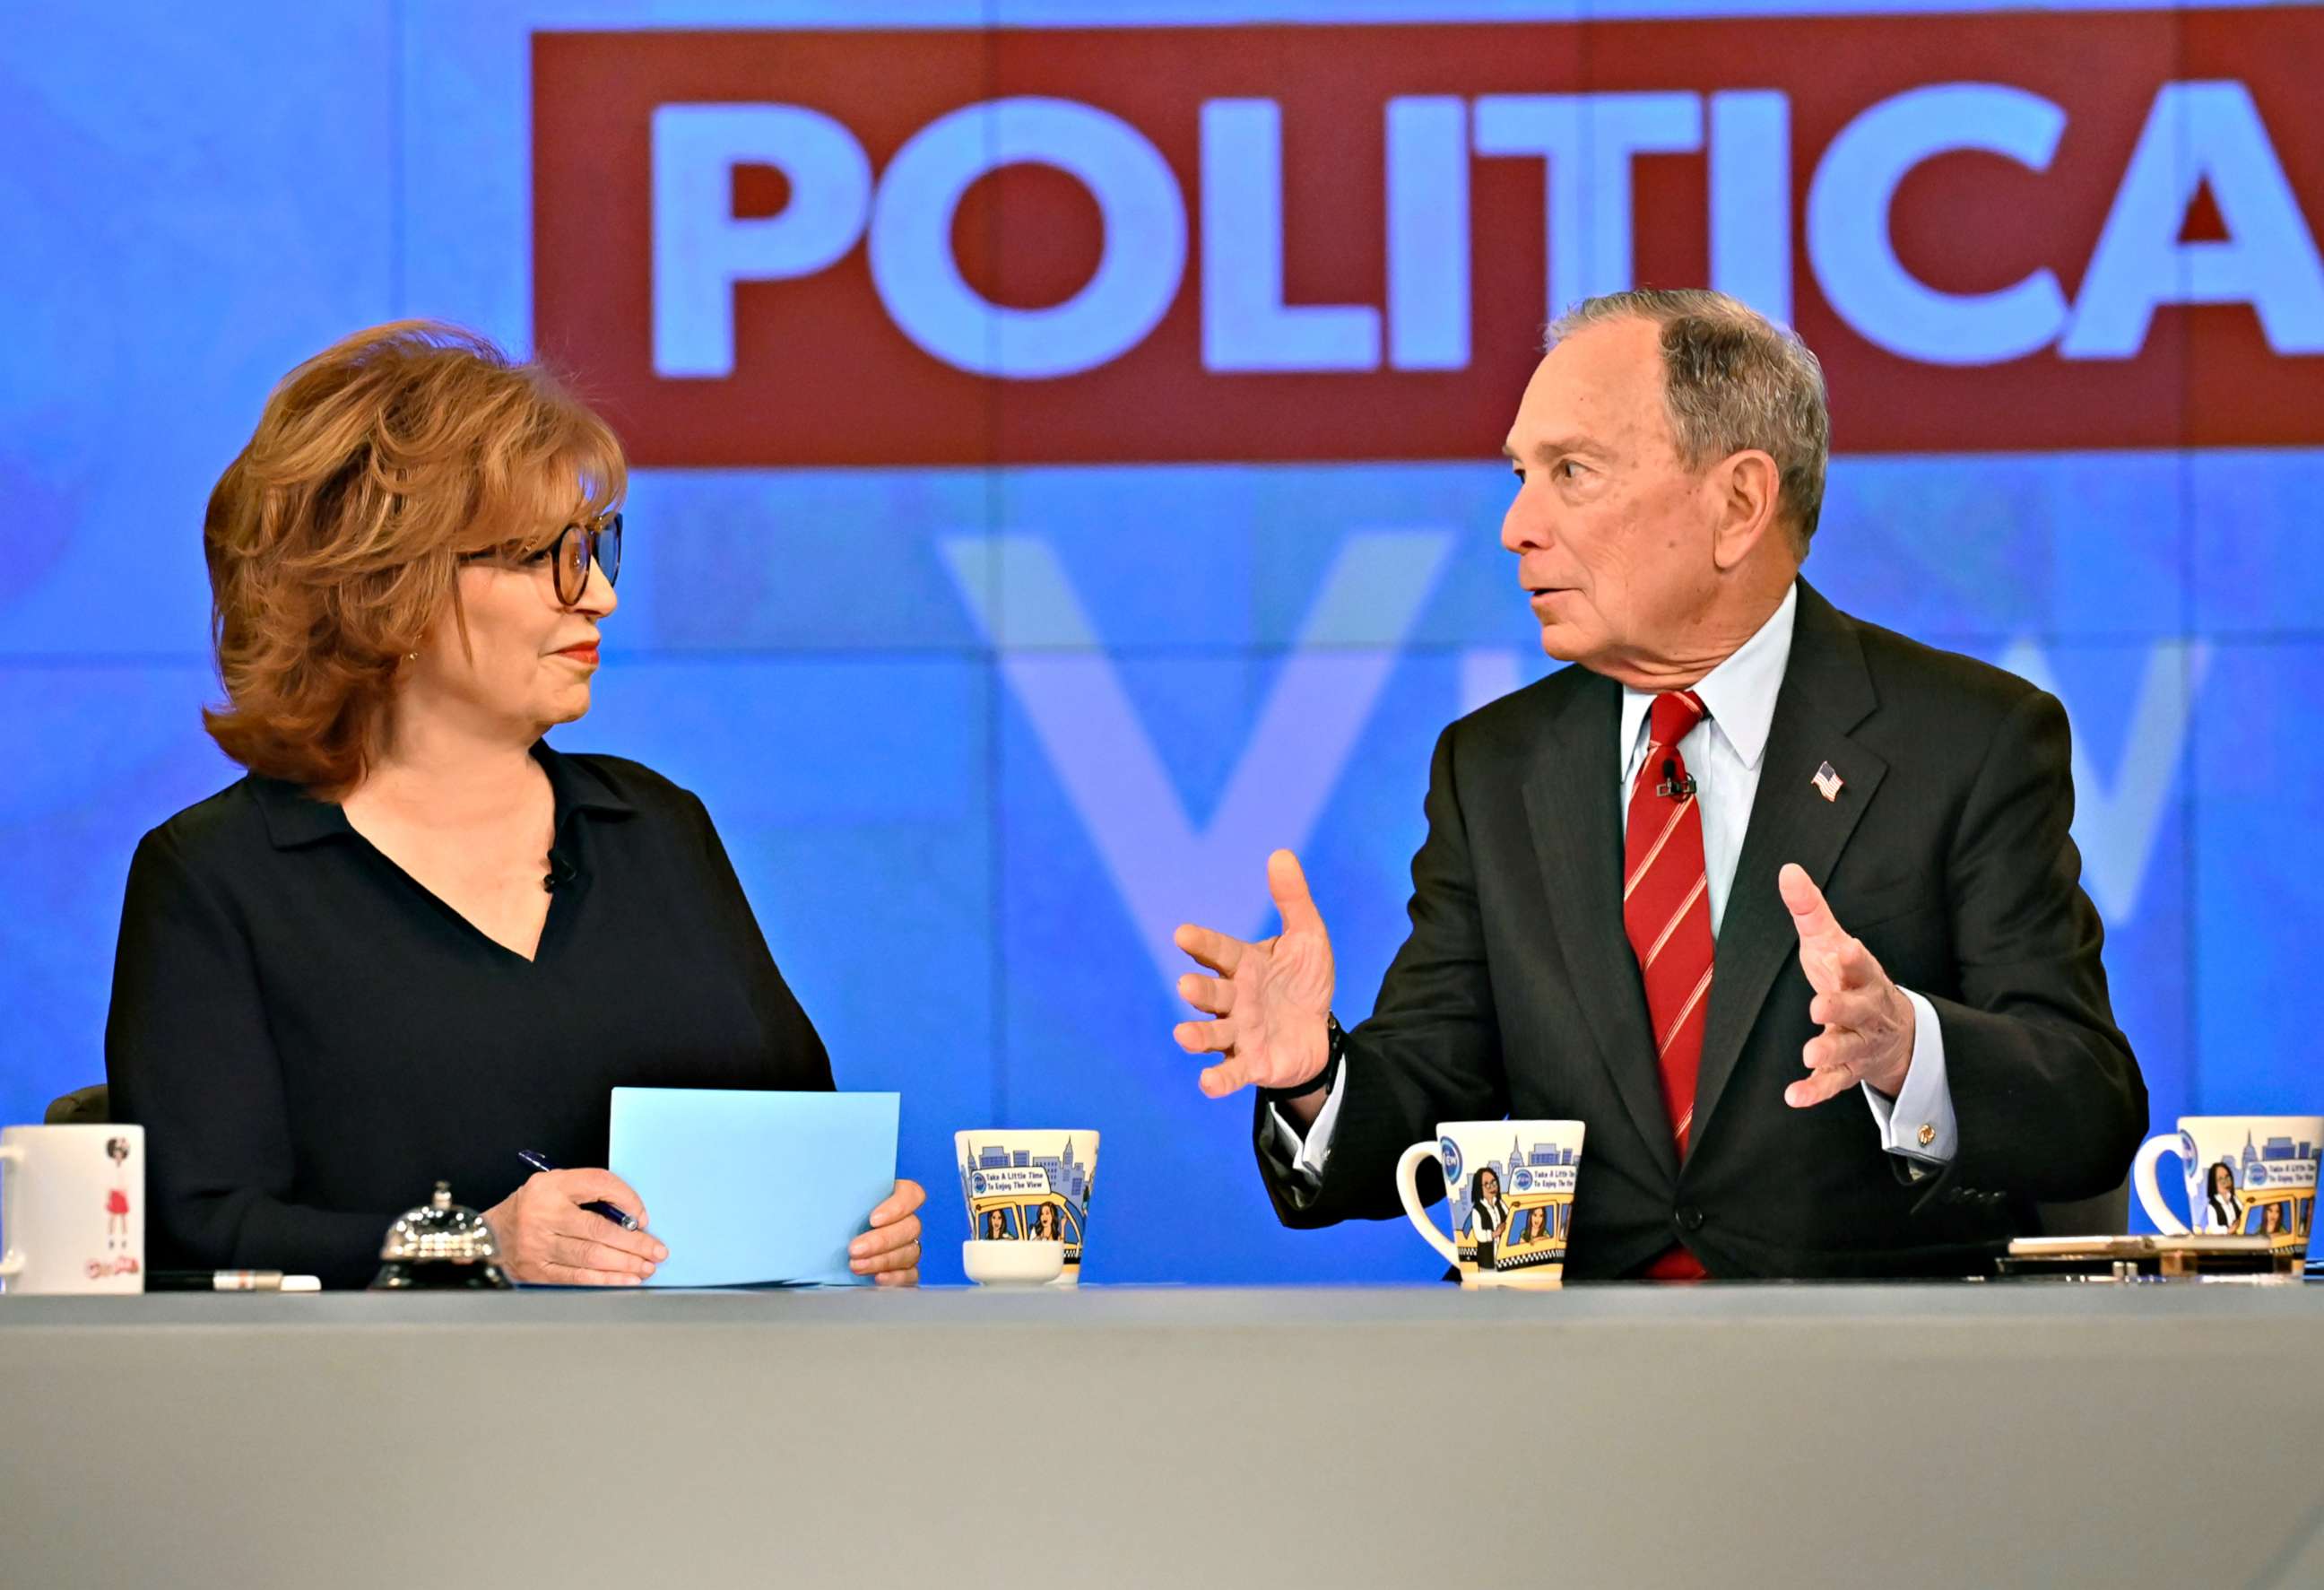 PHOTO: Presidential candidate Michael Bloomberg discusses his unconventional campaign strategy on "The View" as co-host Joy Behar listens, Jan. 15, 2020.